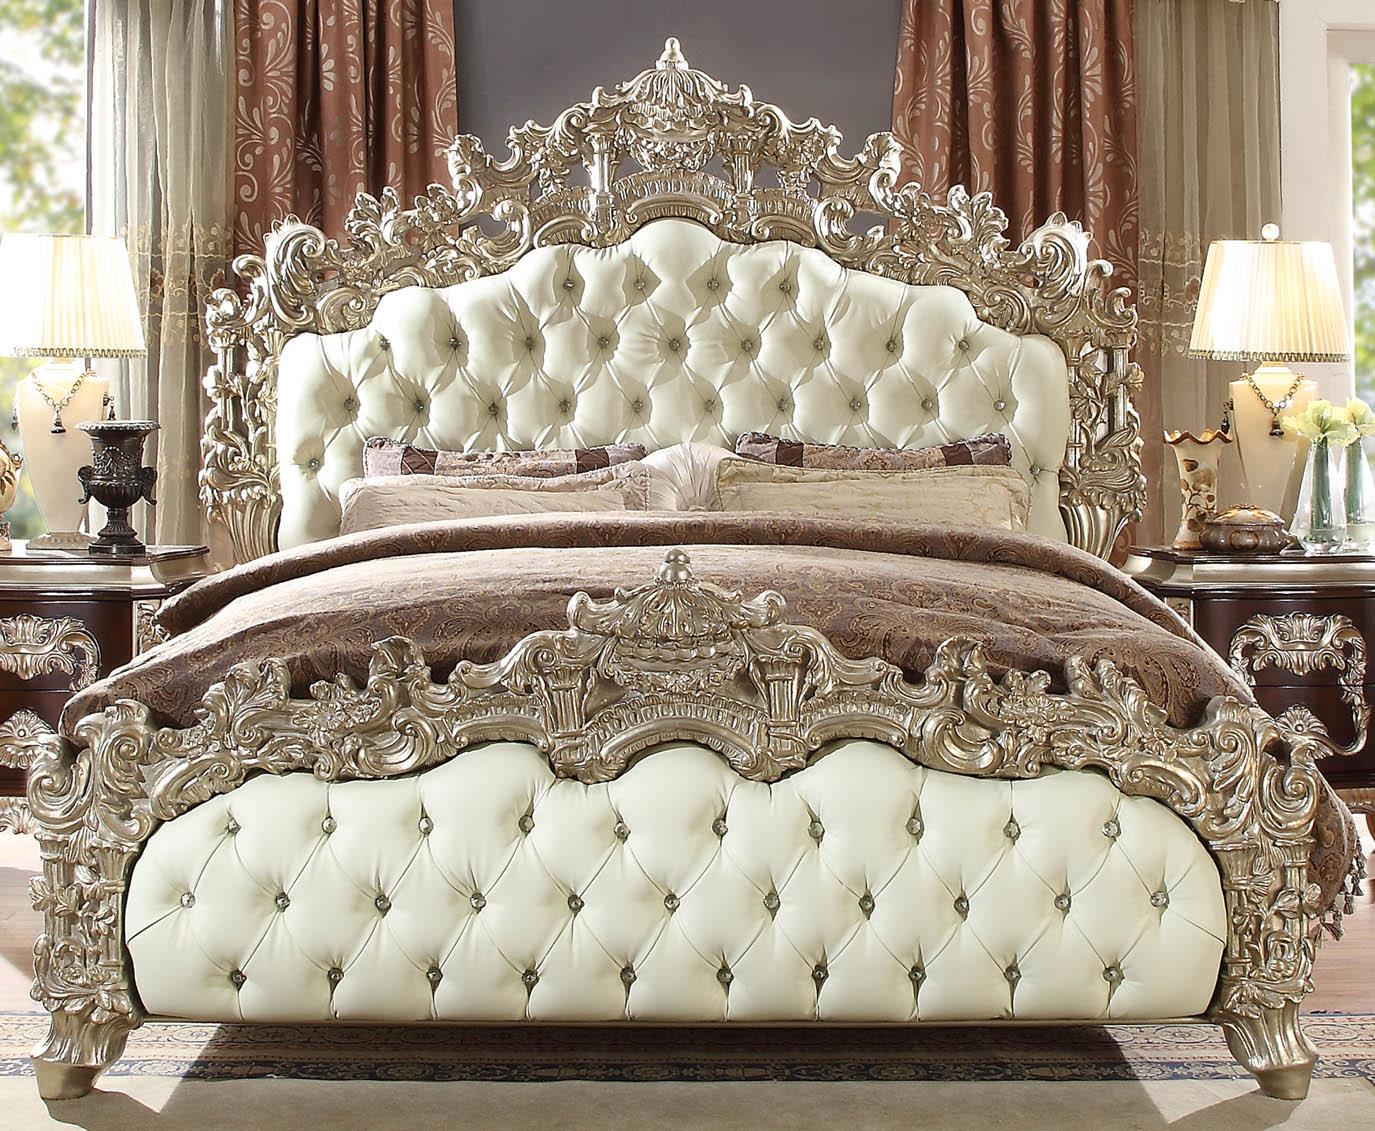 

    
Antique White Silver King Bed Carved Wood Traditional Homey Design HD-8017
